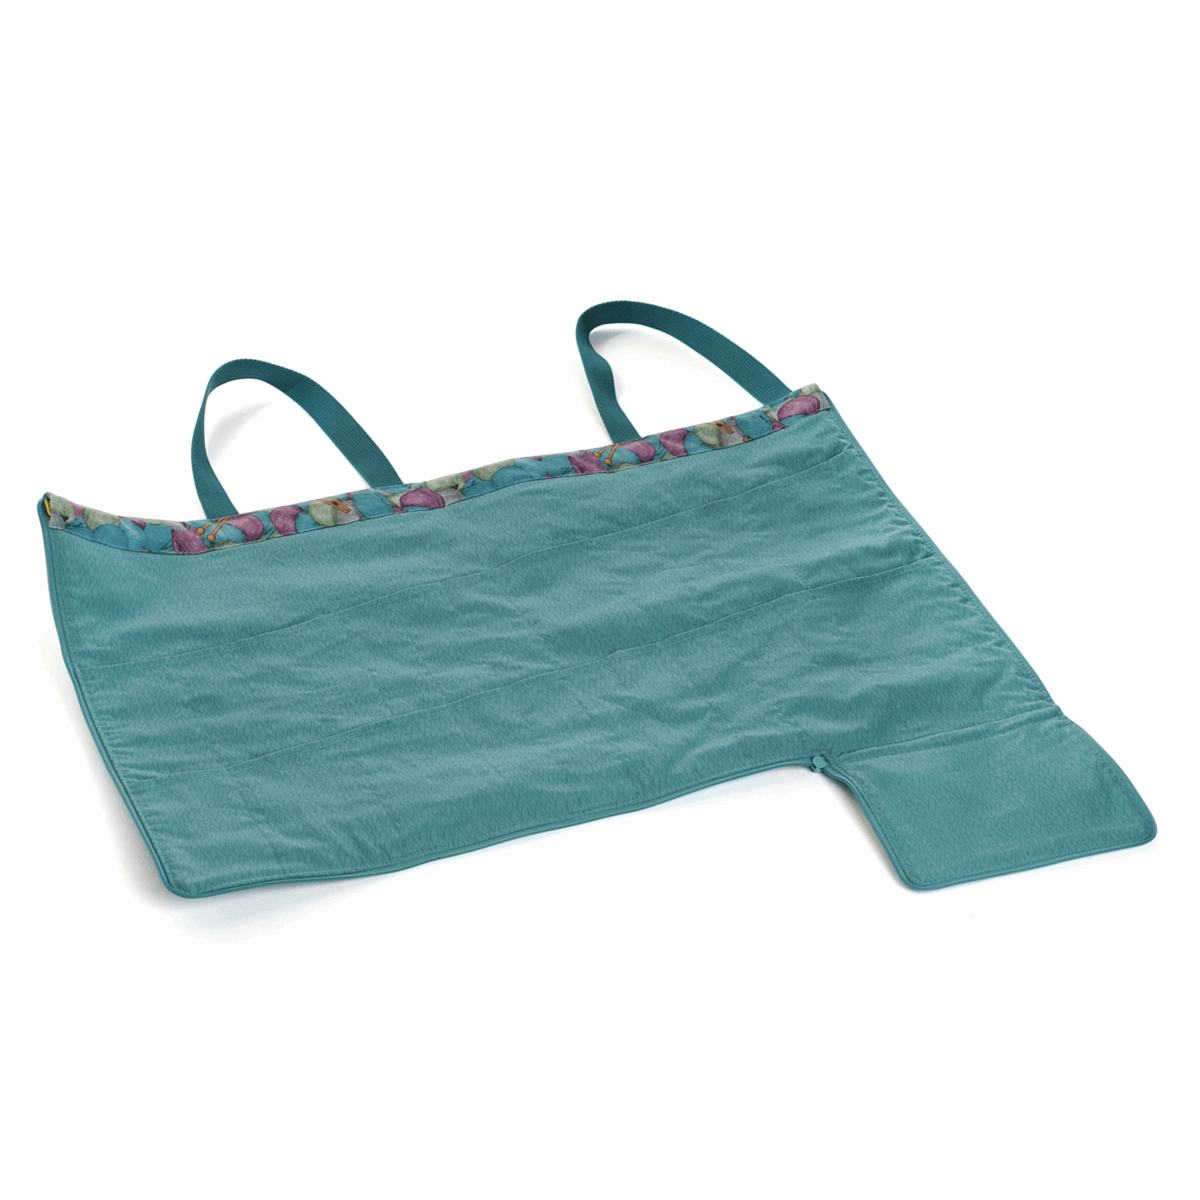 Deluxe Knitting Bag with Pin Storage (Reversible) - Knit 'n' Purl